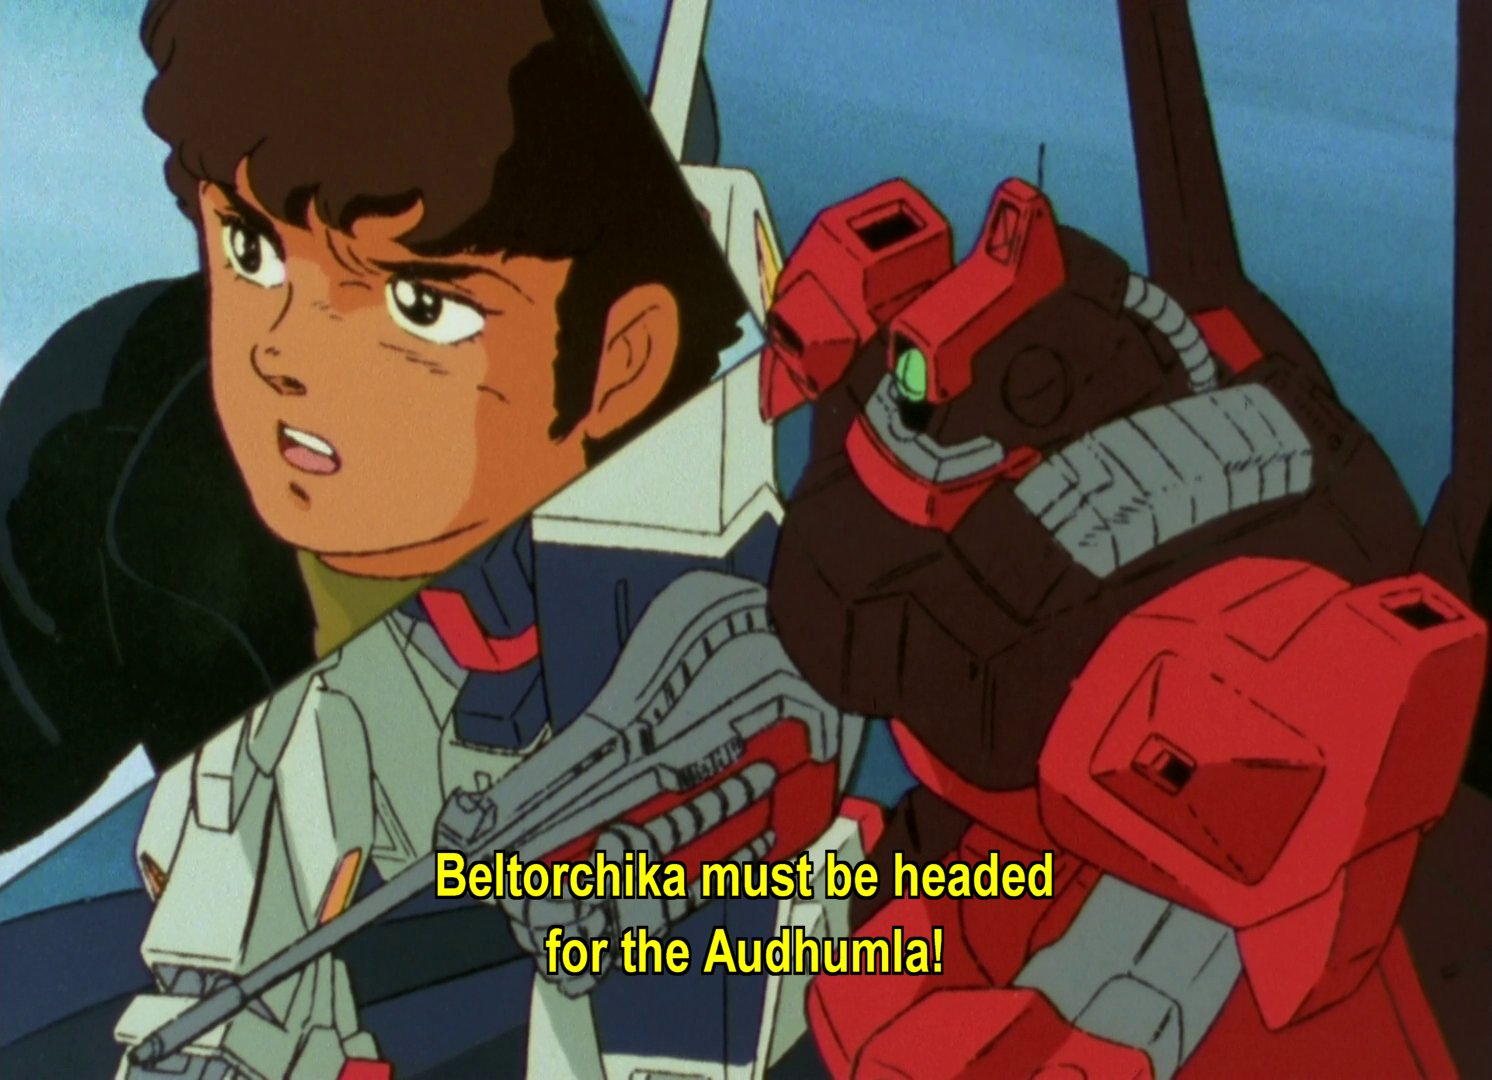 Amuro: Beltorchika must be headed for the Audhumla!